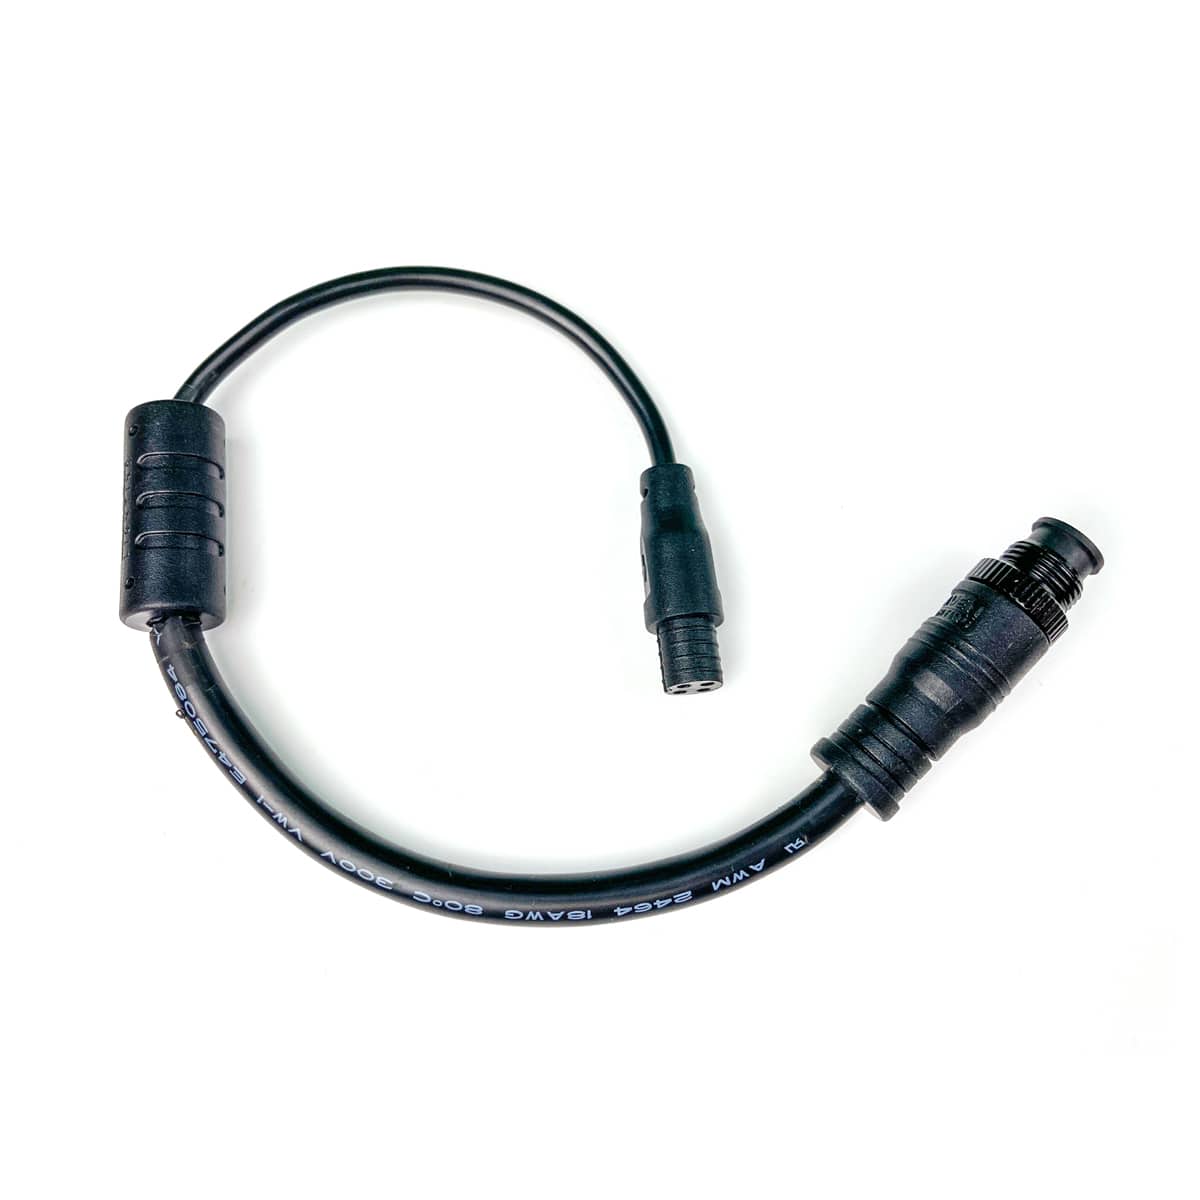 Bistro Light to Deck Lighting Converter cable